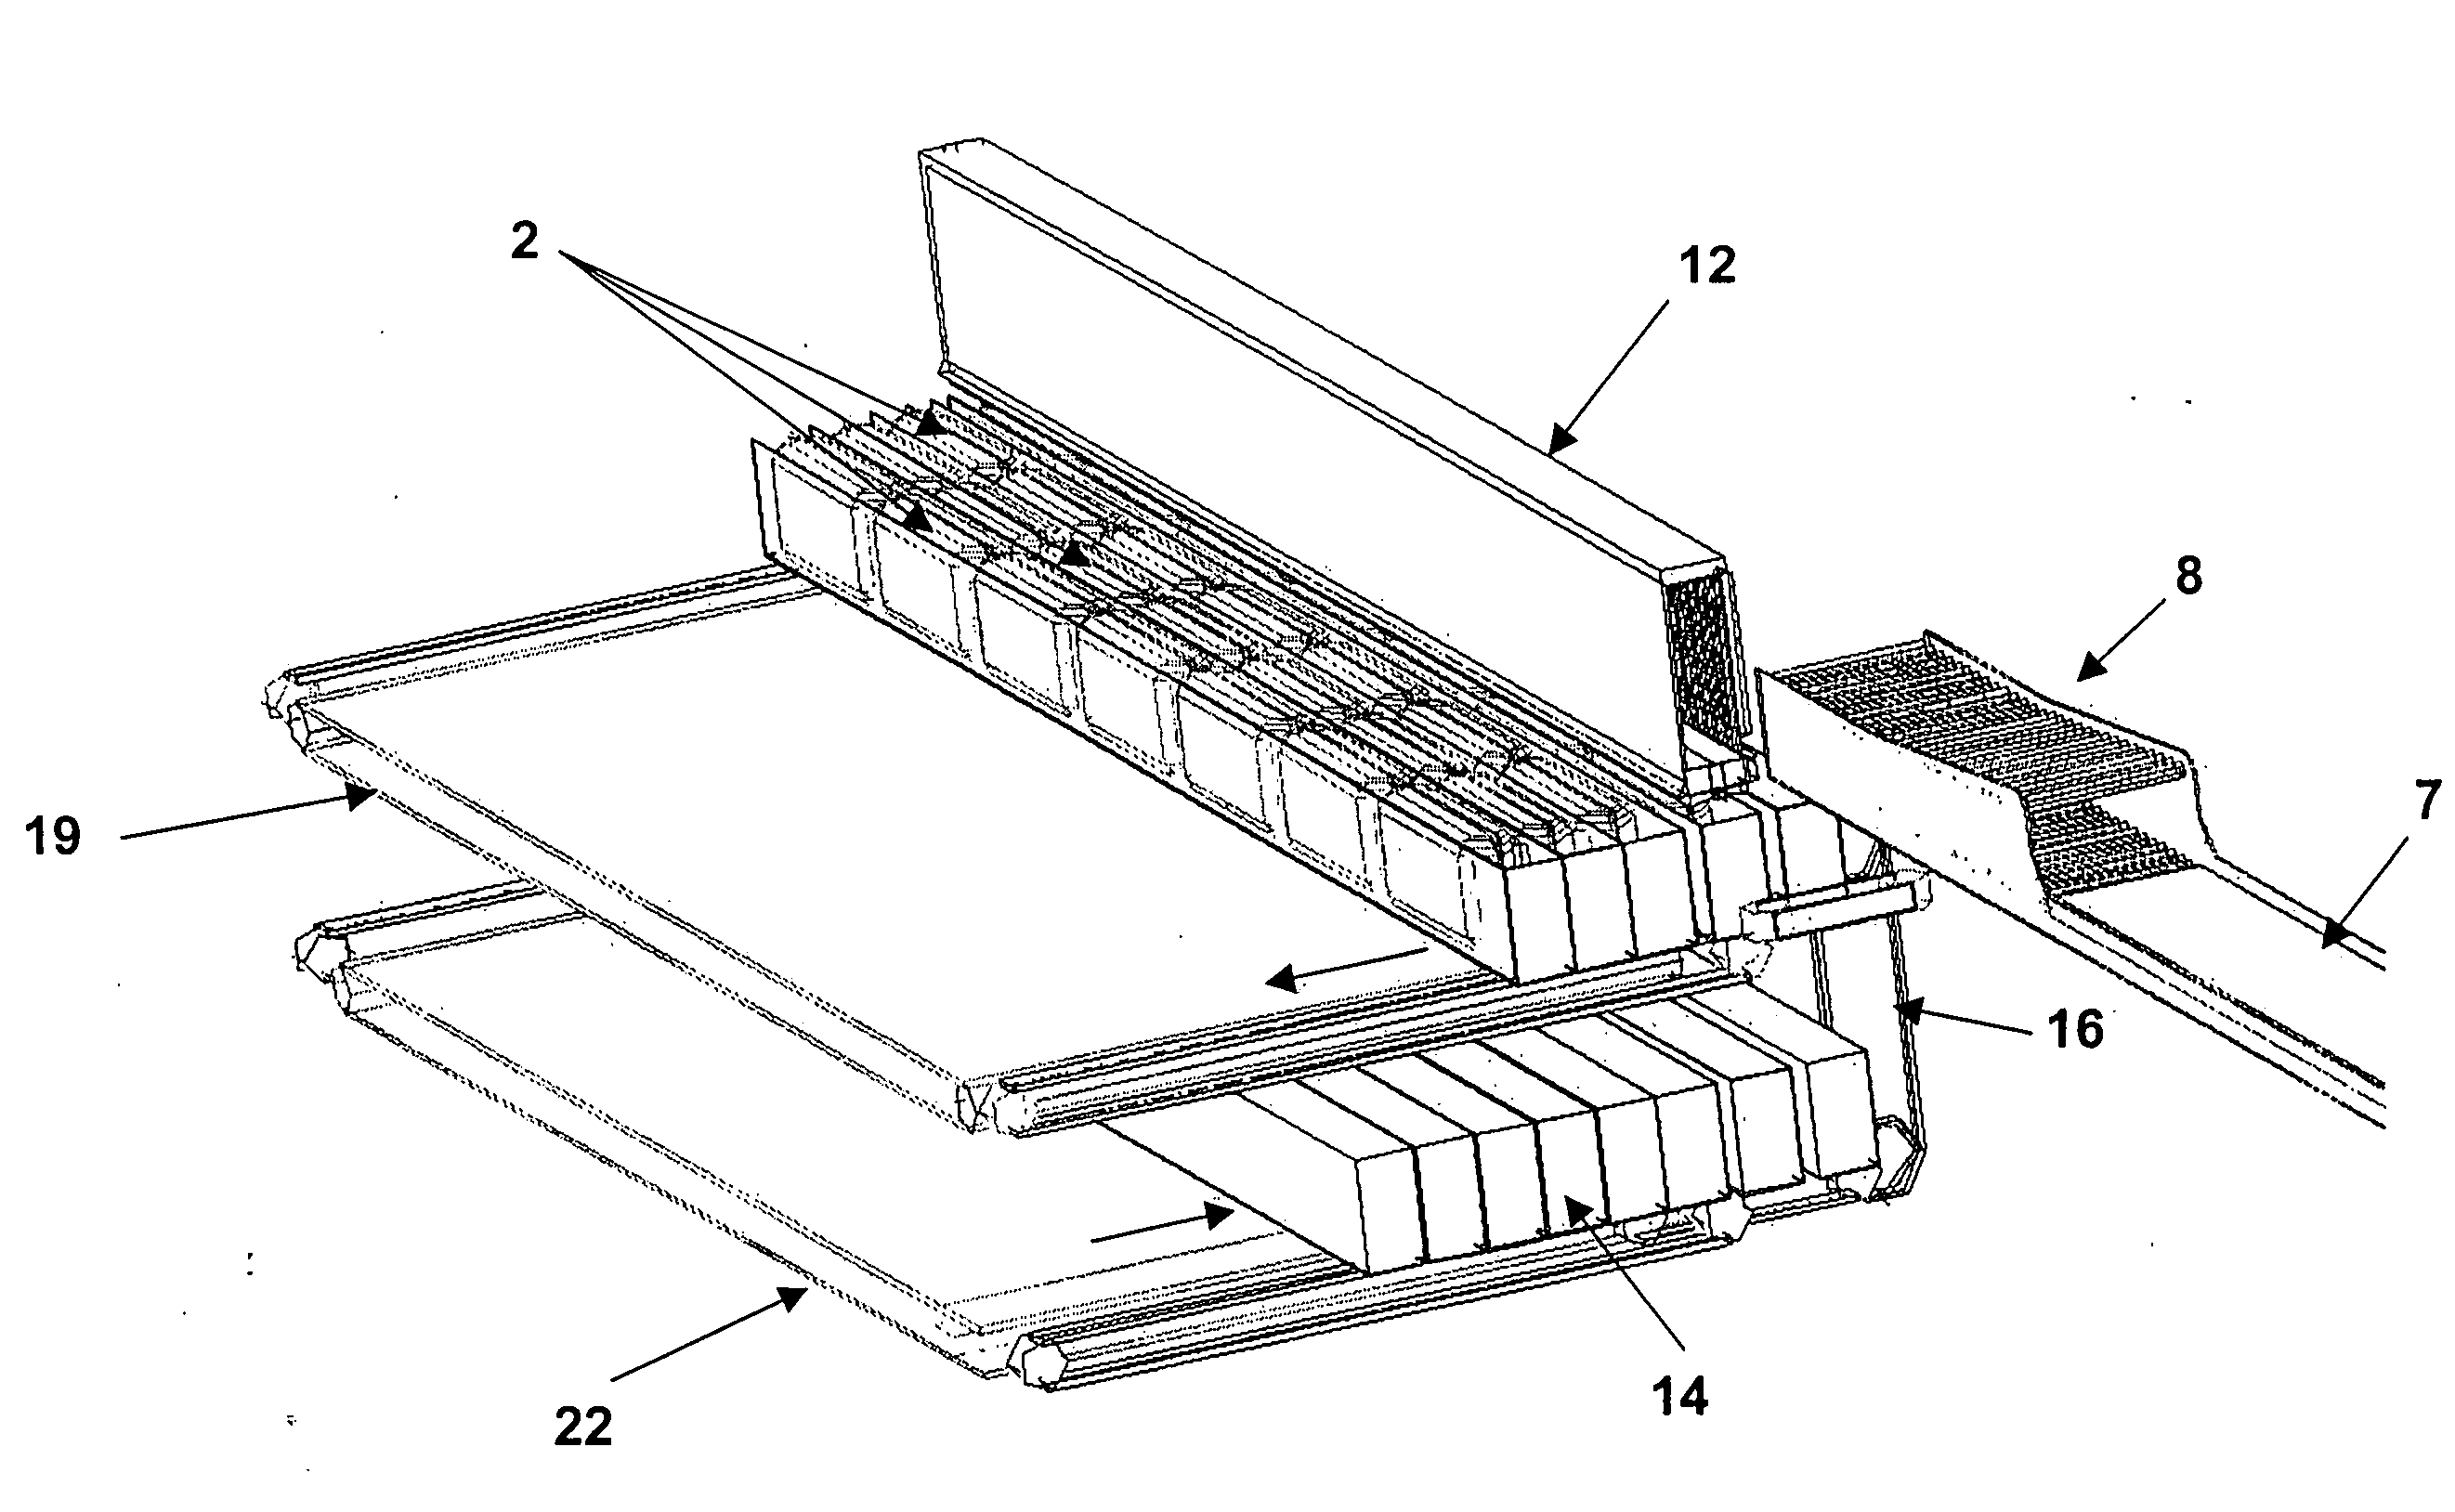 System and method for loading a cargo space with piece goods